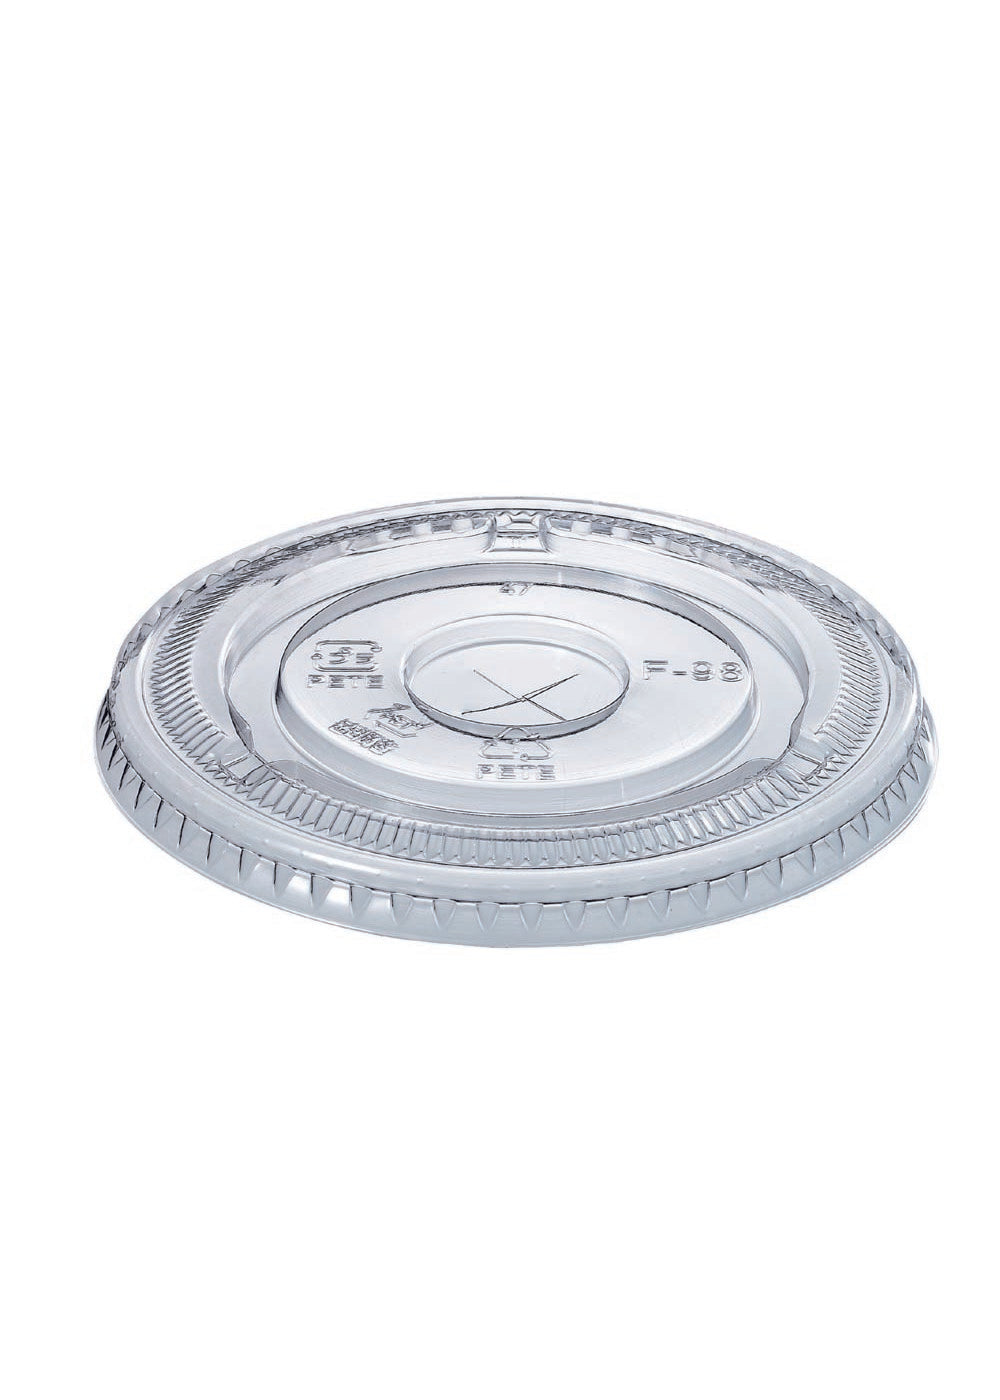 F98 - HONOR PET Flat Lid for DIA. 98mm Cup